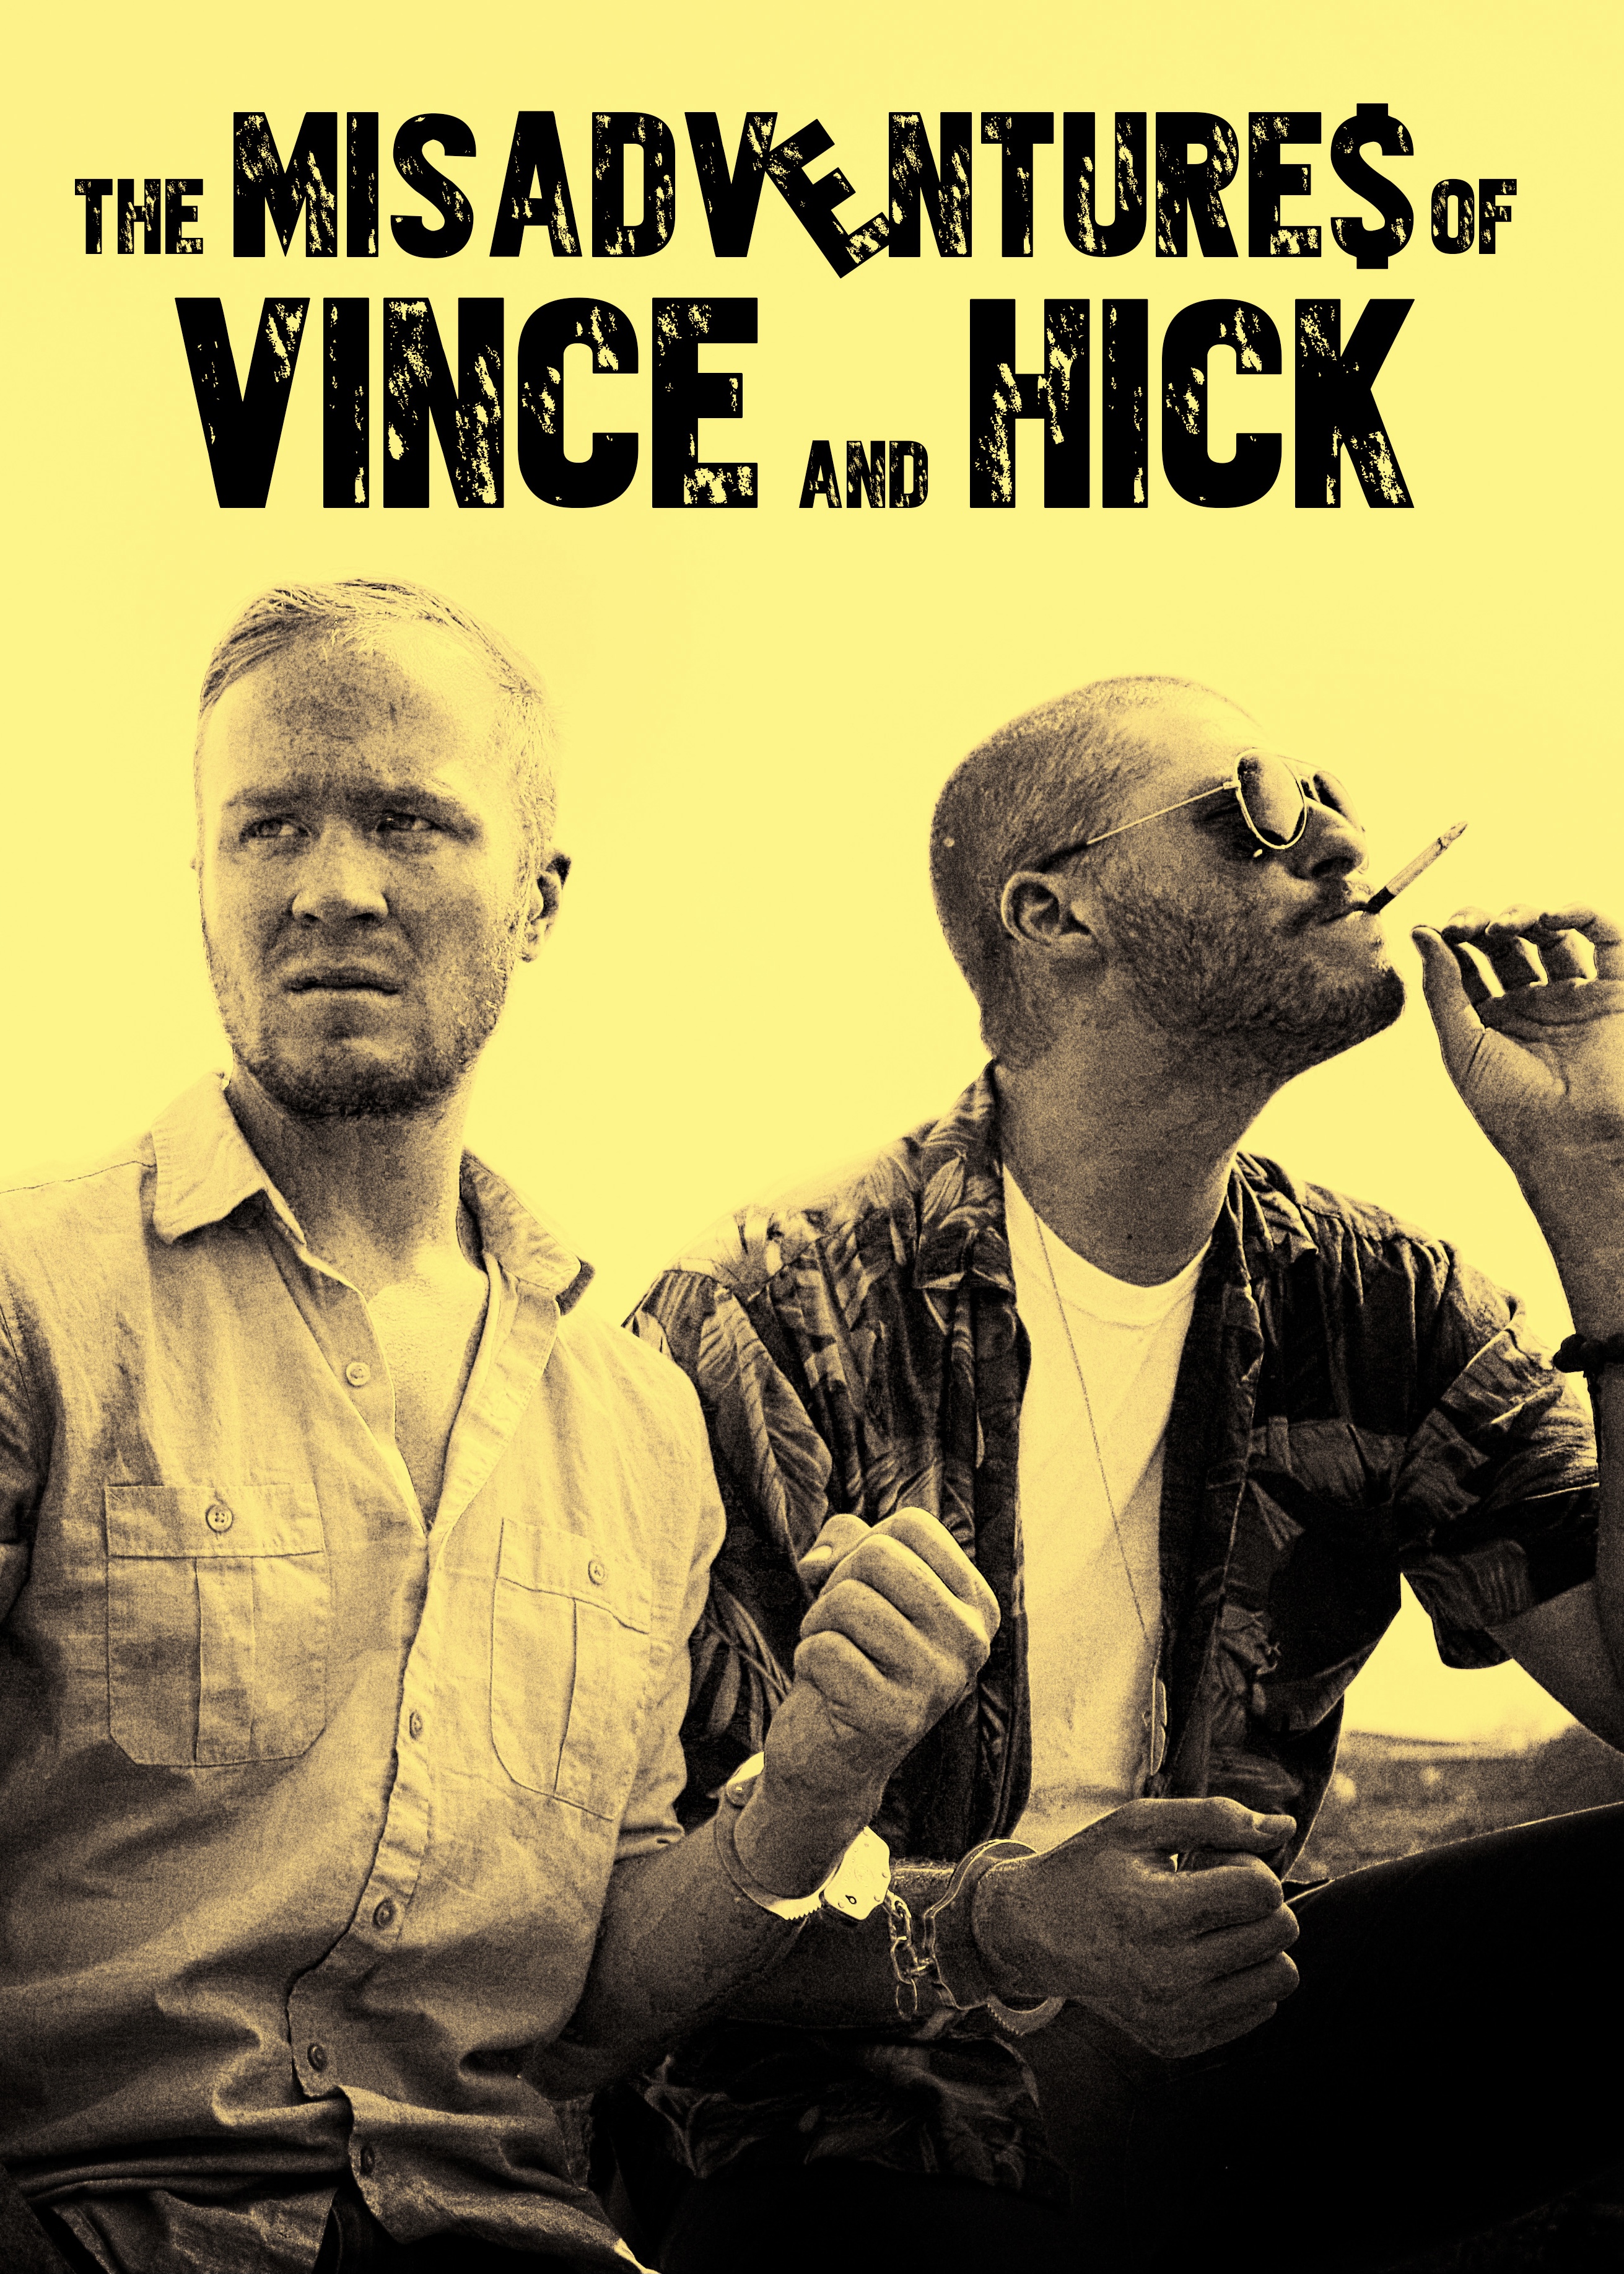 The Misadventures of Vince and Hick